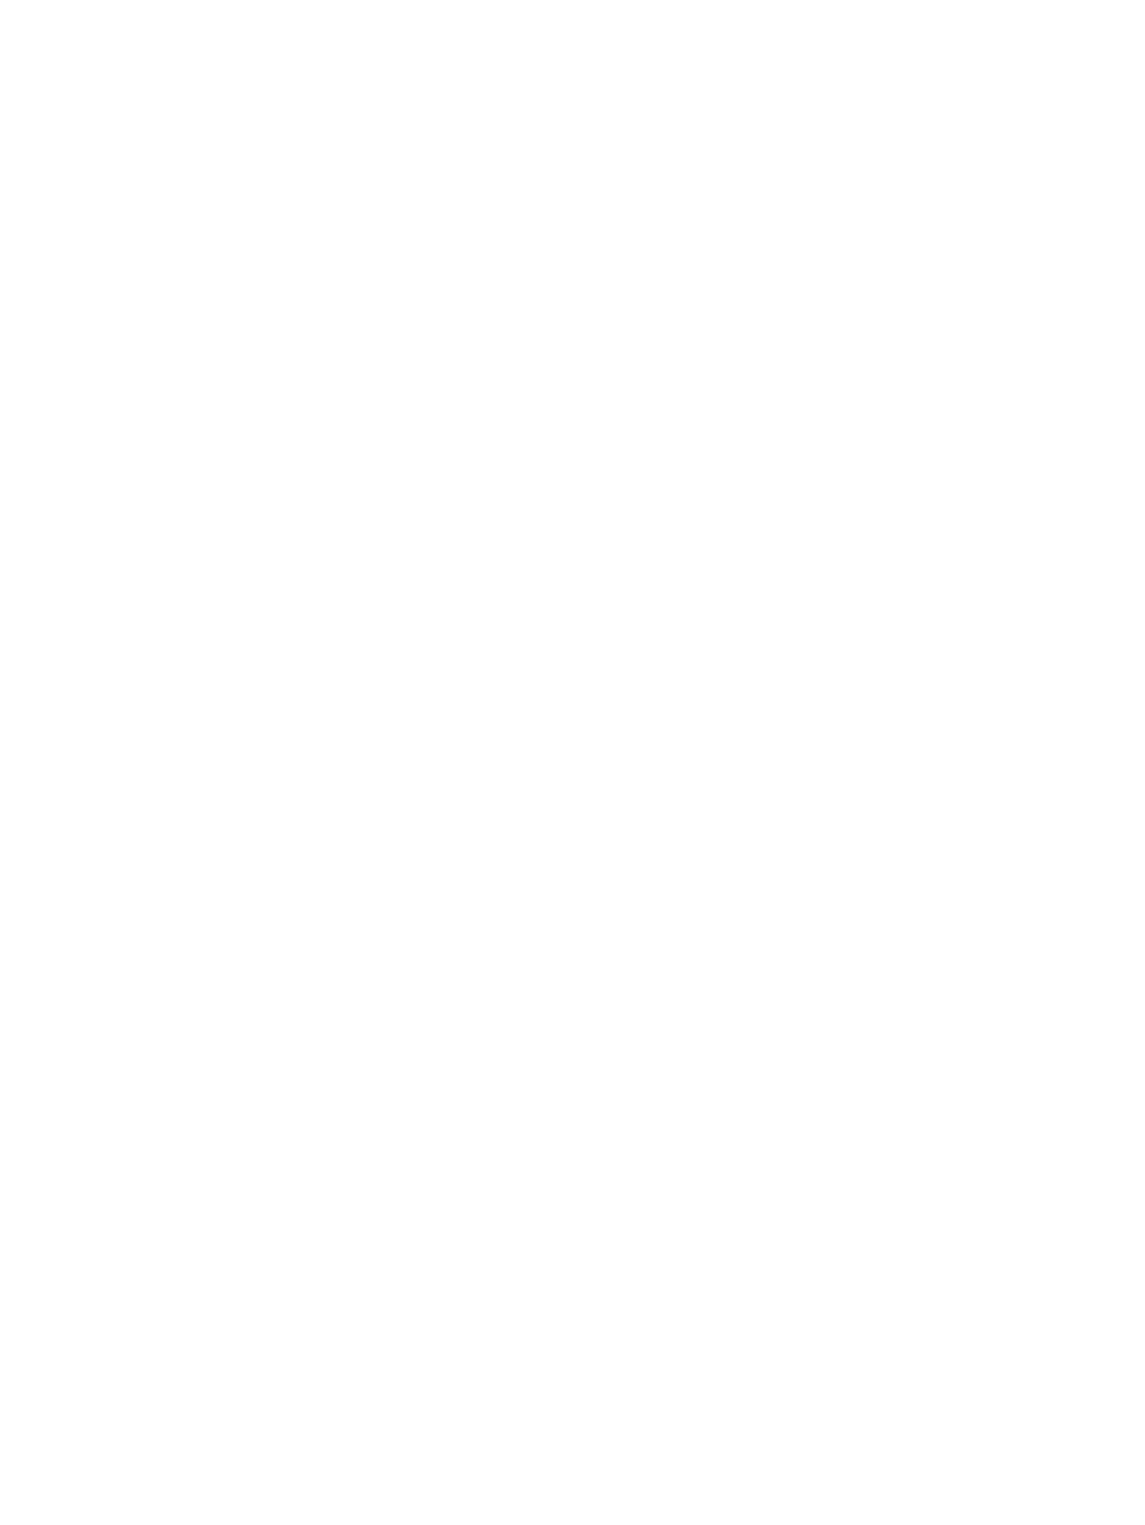 Honoring our Heroes